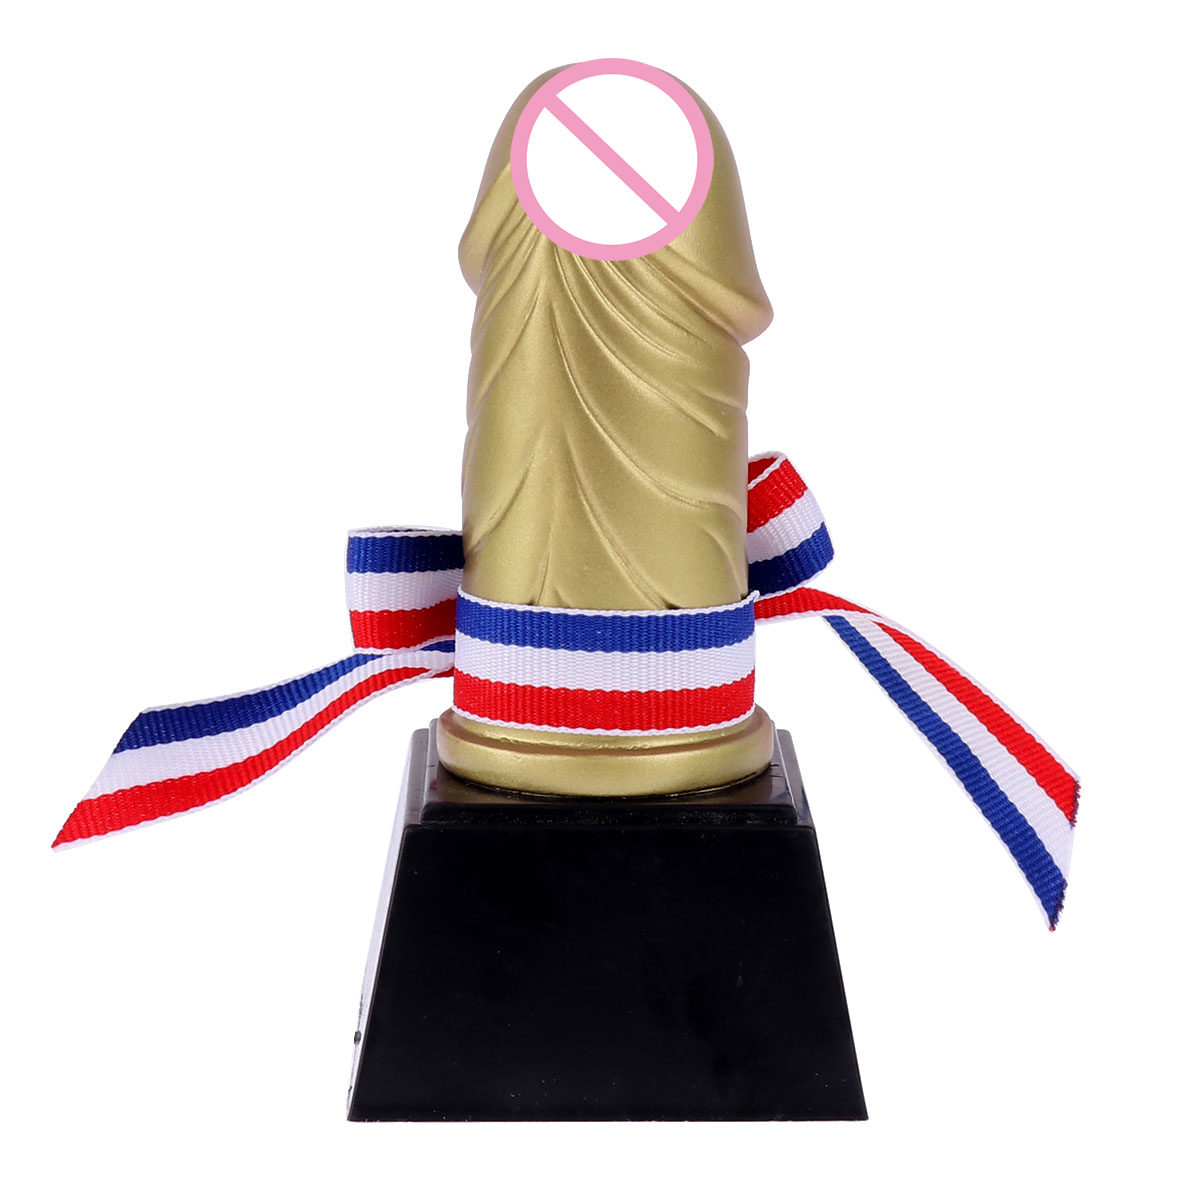 Creative Penis Trophy Novelty Golden Birthday Gifts Hen Stag Party Trophy Funny Prop Toys Unique Bachelorette Party Accessories